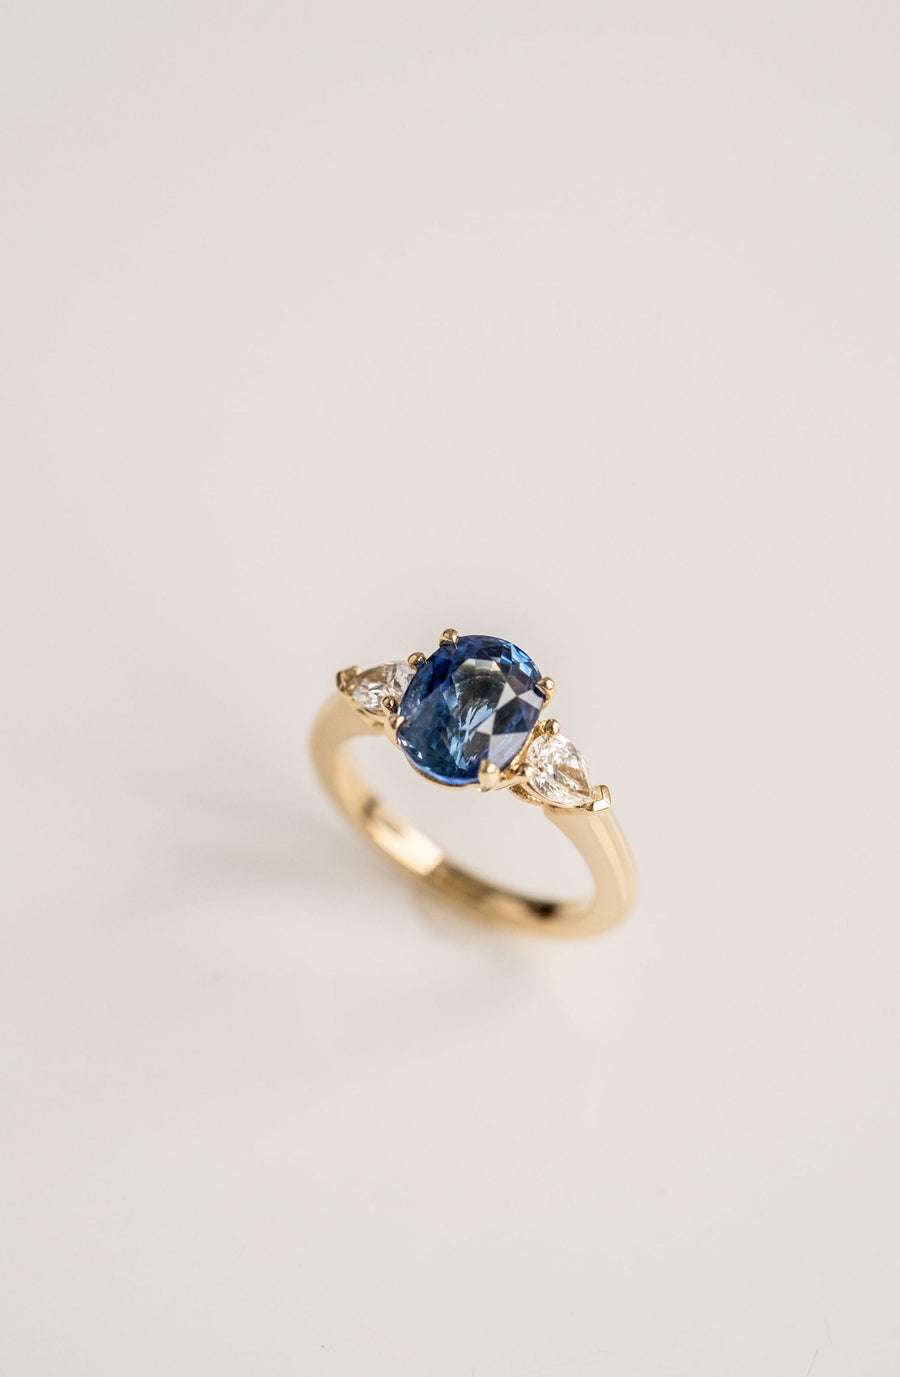 3.24ct. Oval Blue Sri Lankan Sapphire Engagement Ring With Pear Shape Diamond Accents, 14k Yellow Gold